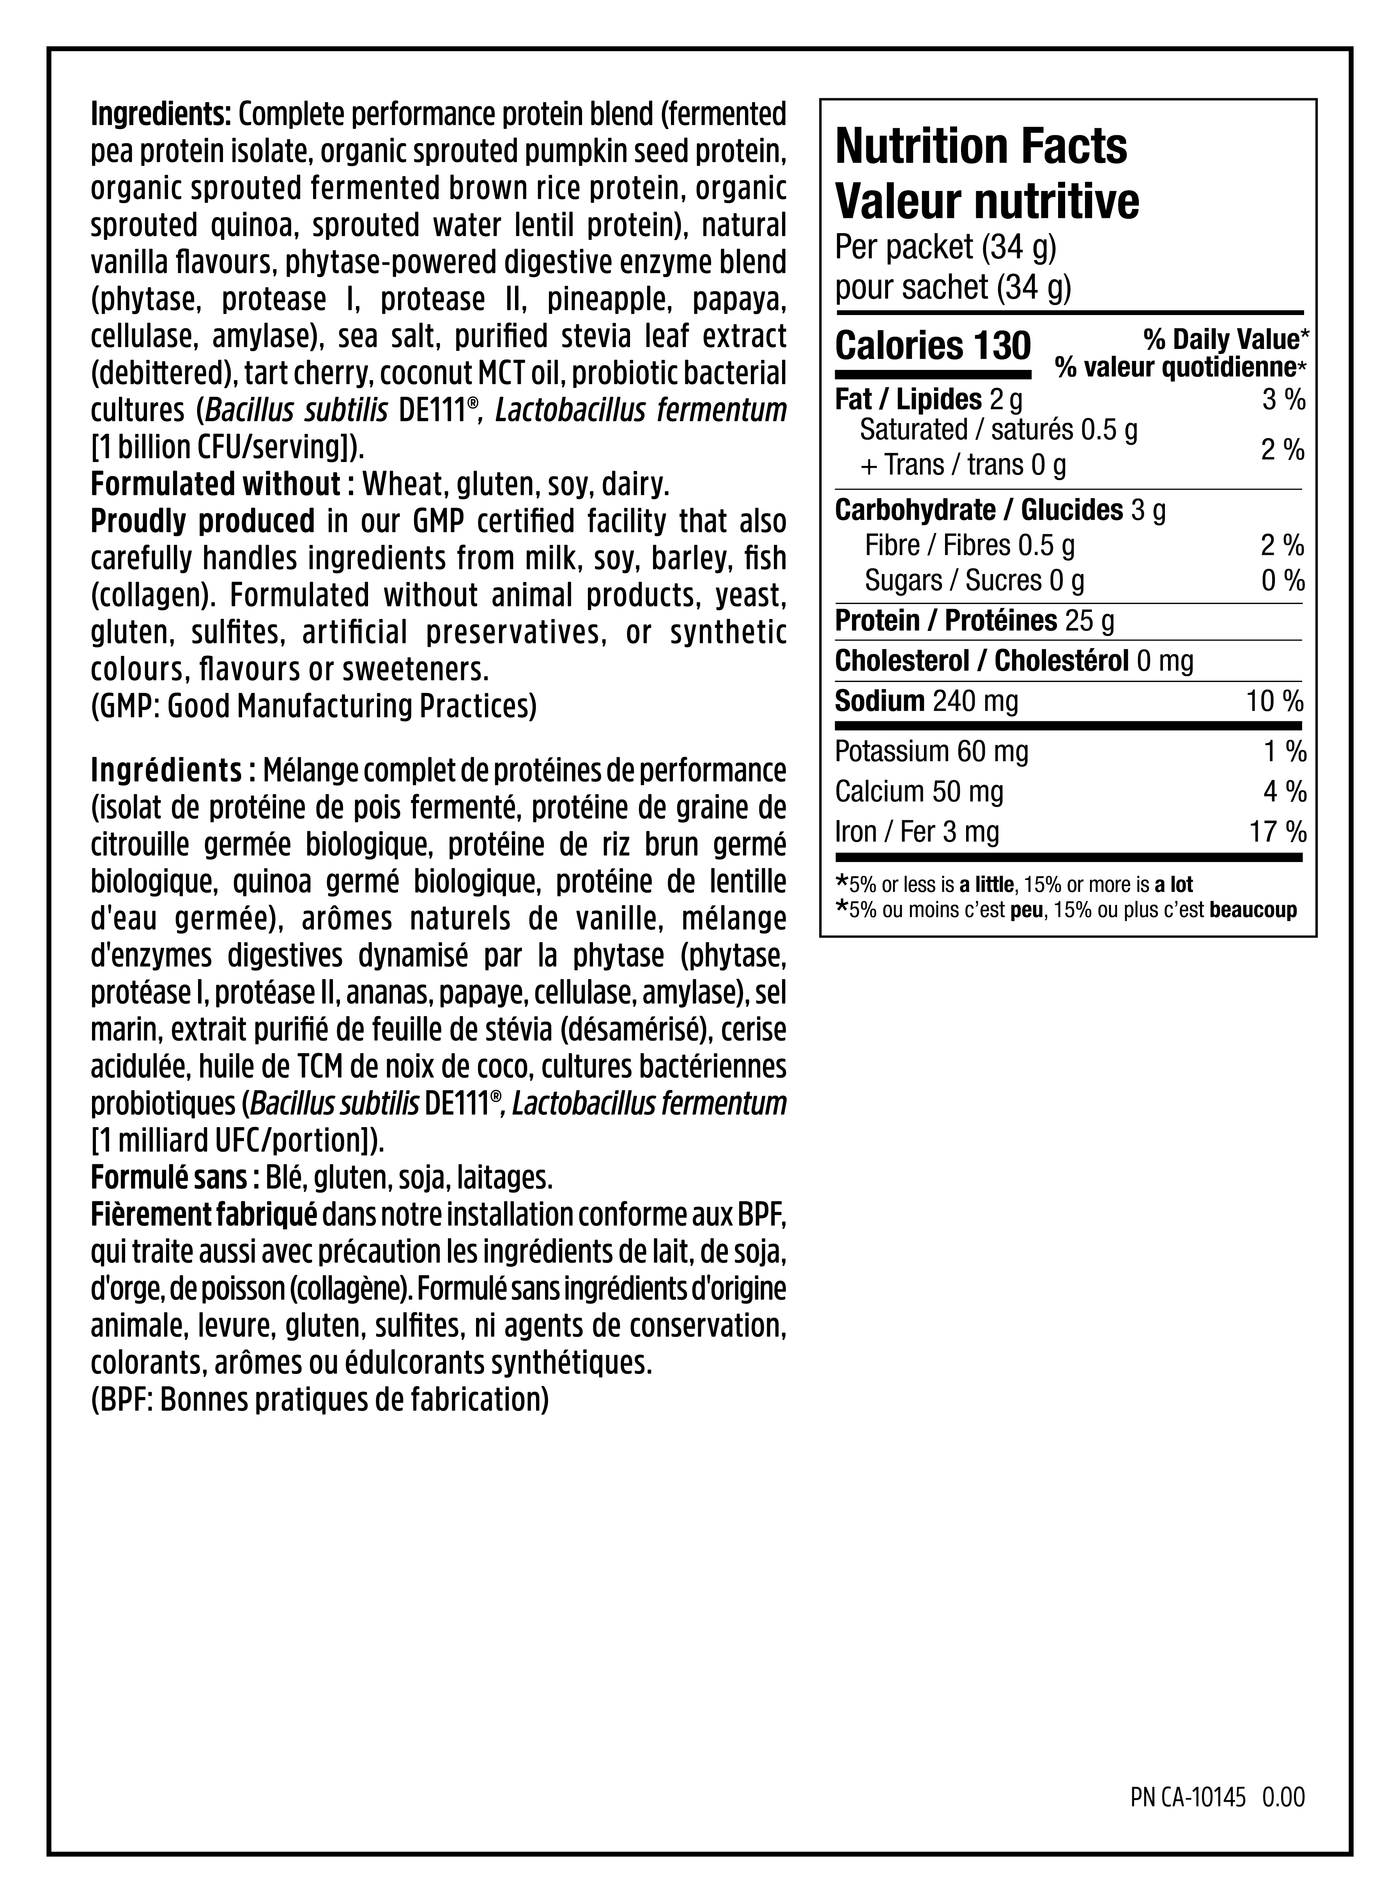 Boosted Plant Protein - 34g - Nutrition Facts